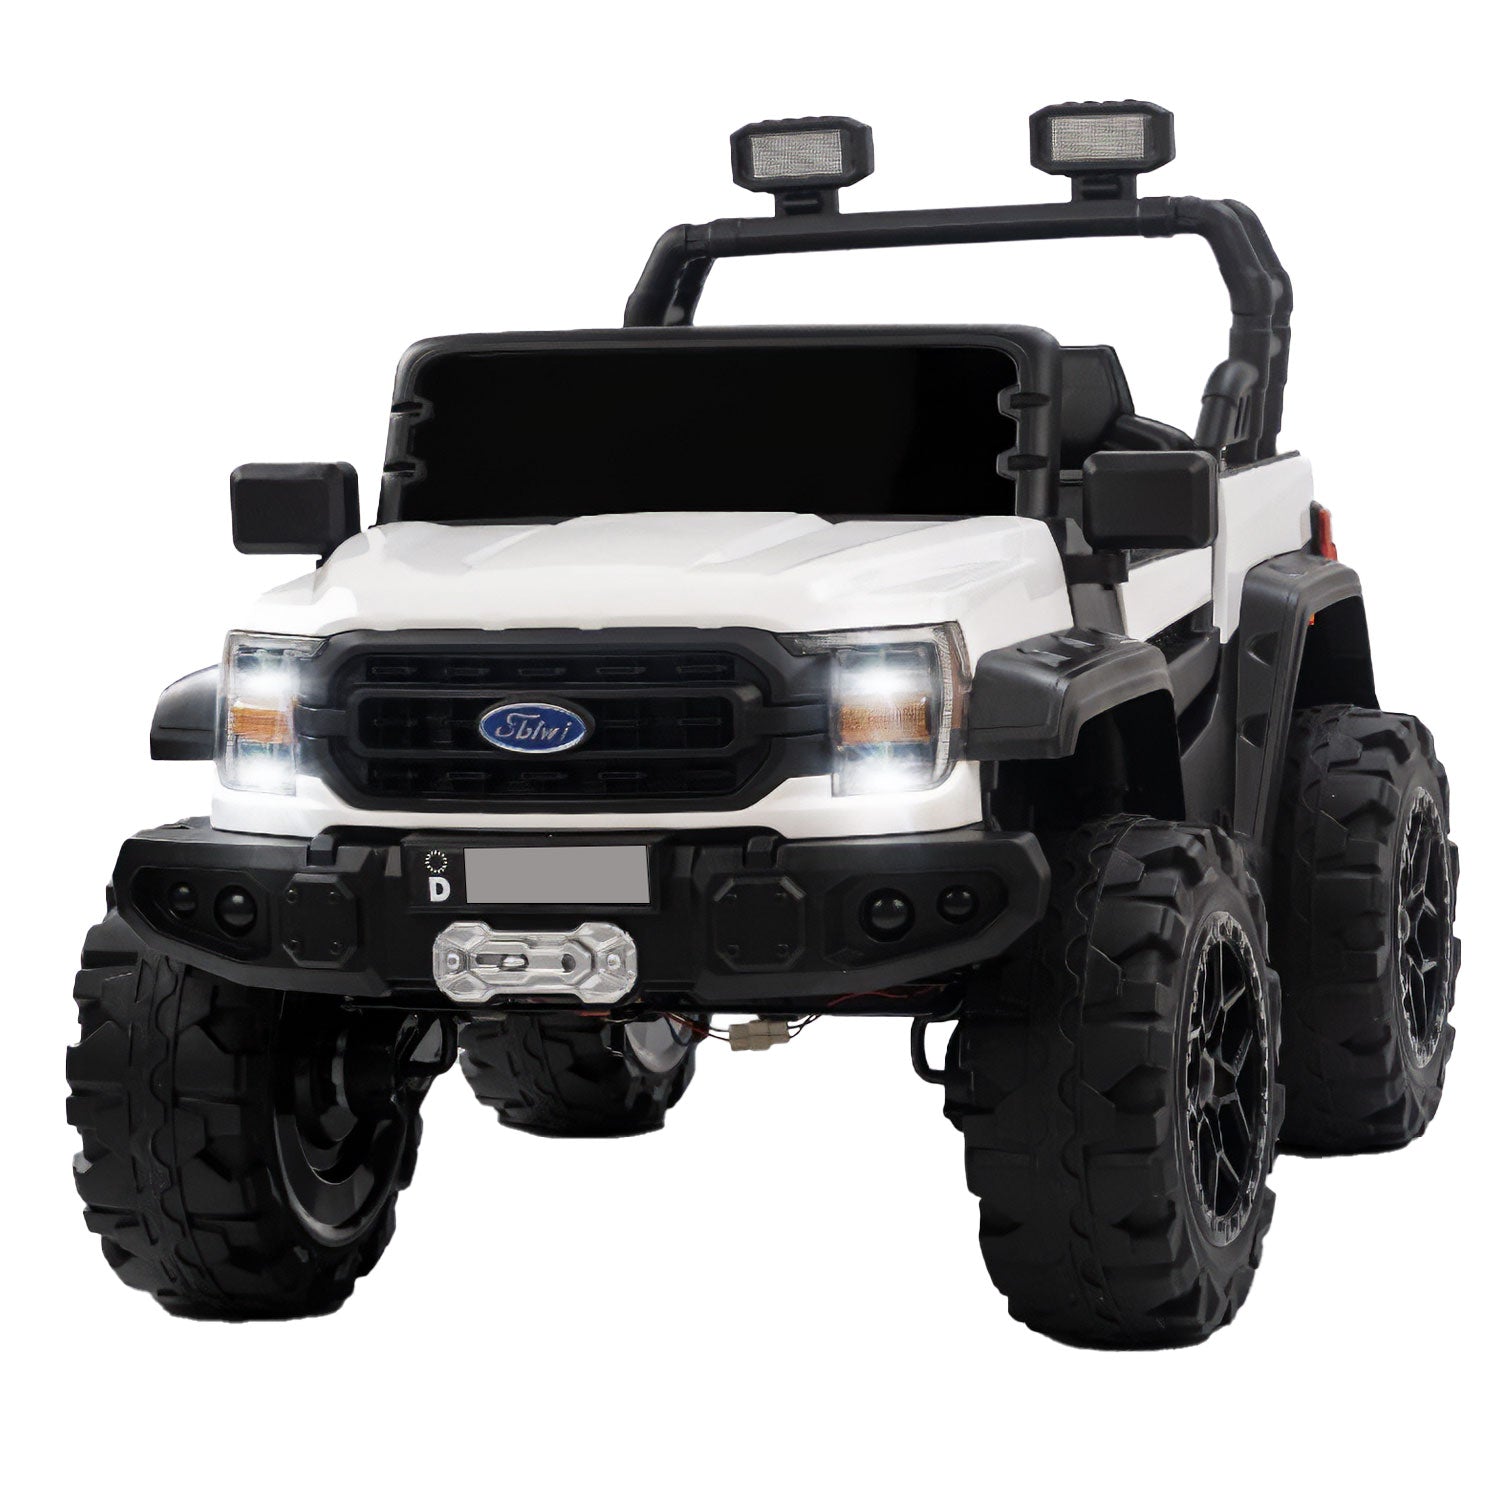 Baby Moo Ford 4X4 Battery Operated Electric Ride On Jeep Rechargeable 12V Battery With Remote Control LED Lights, Music & USB Port - White